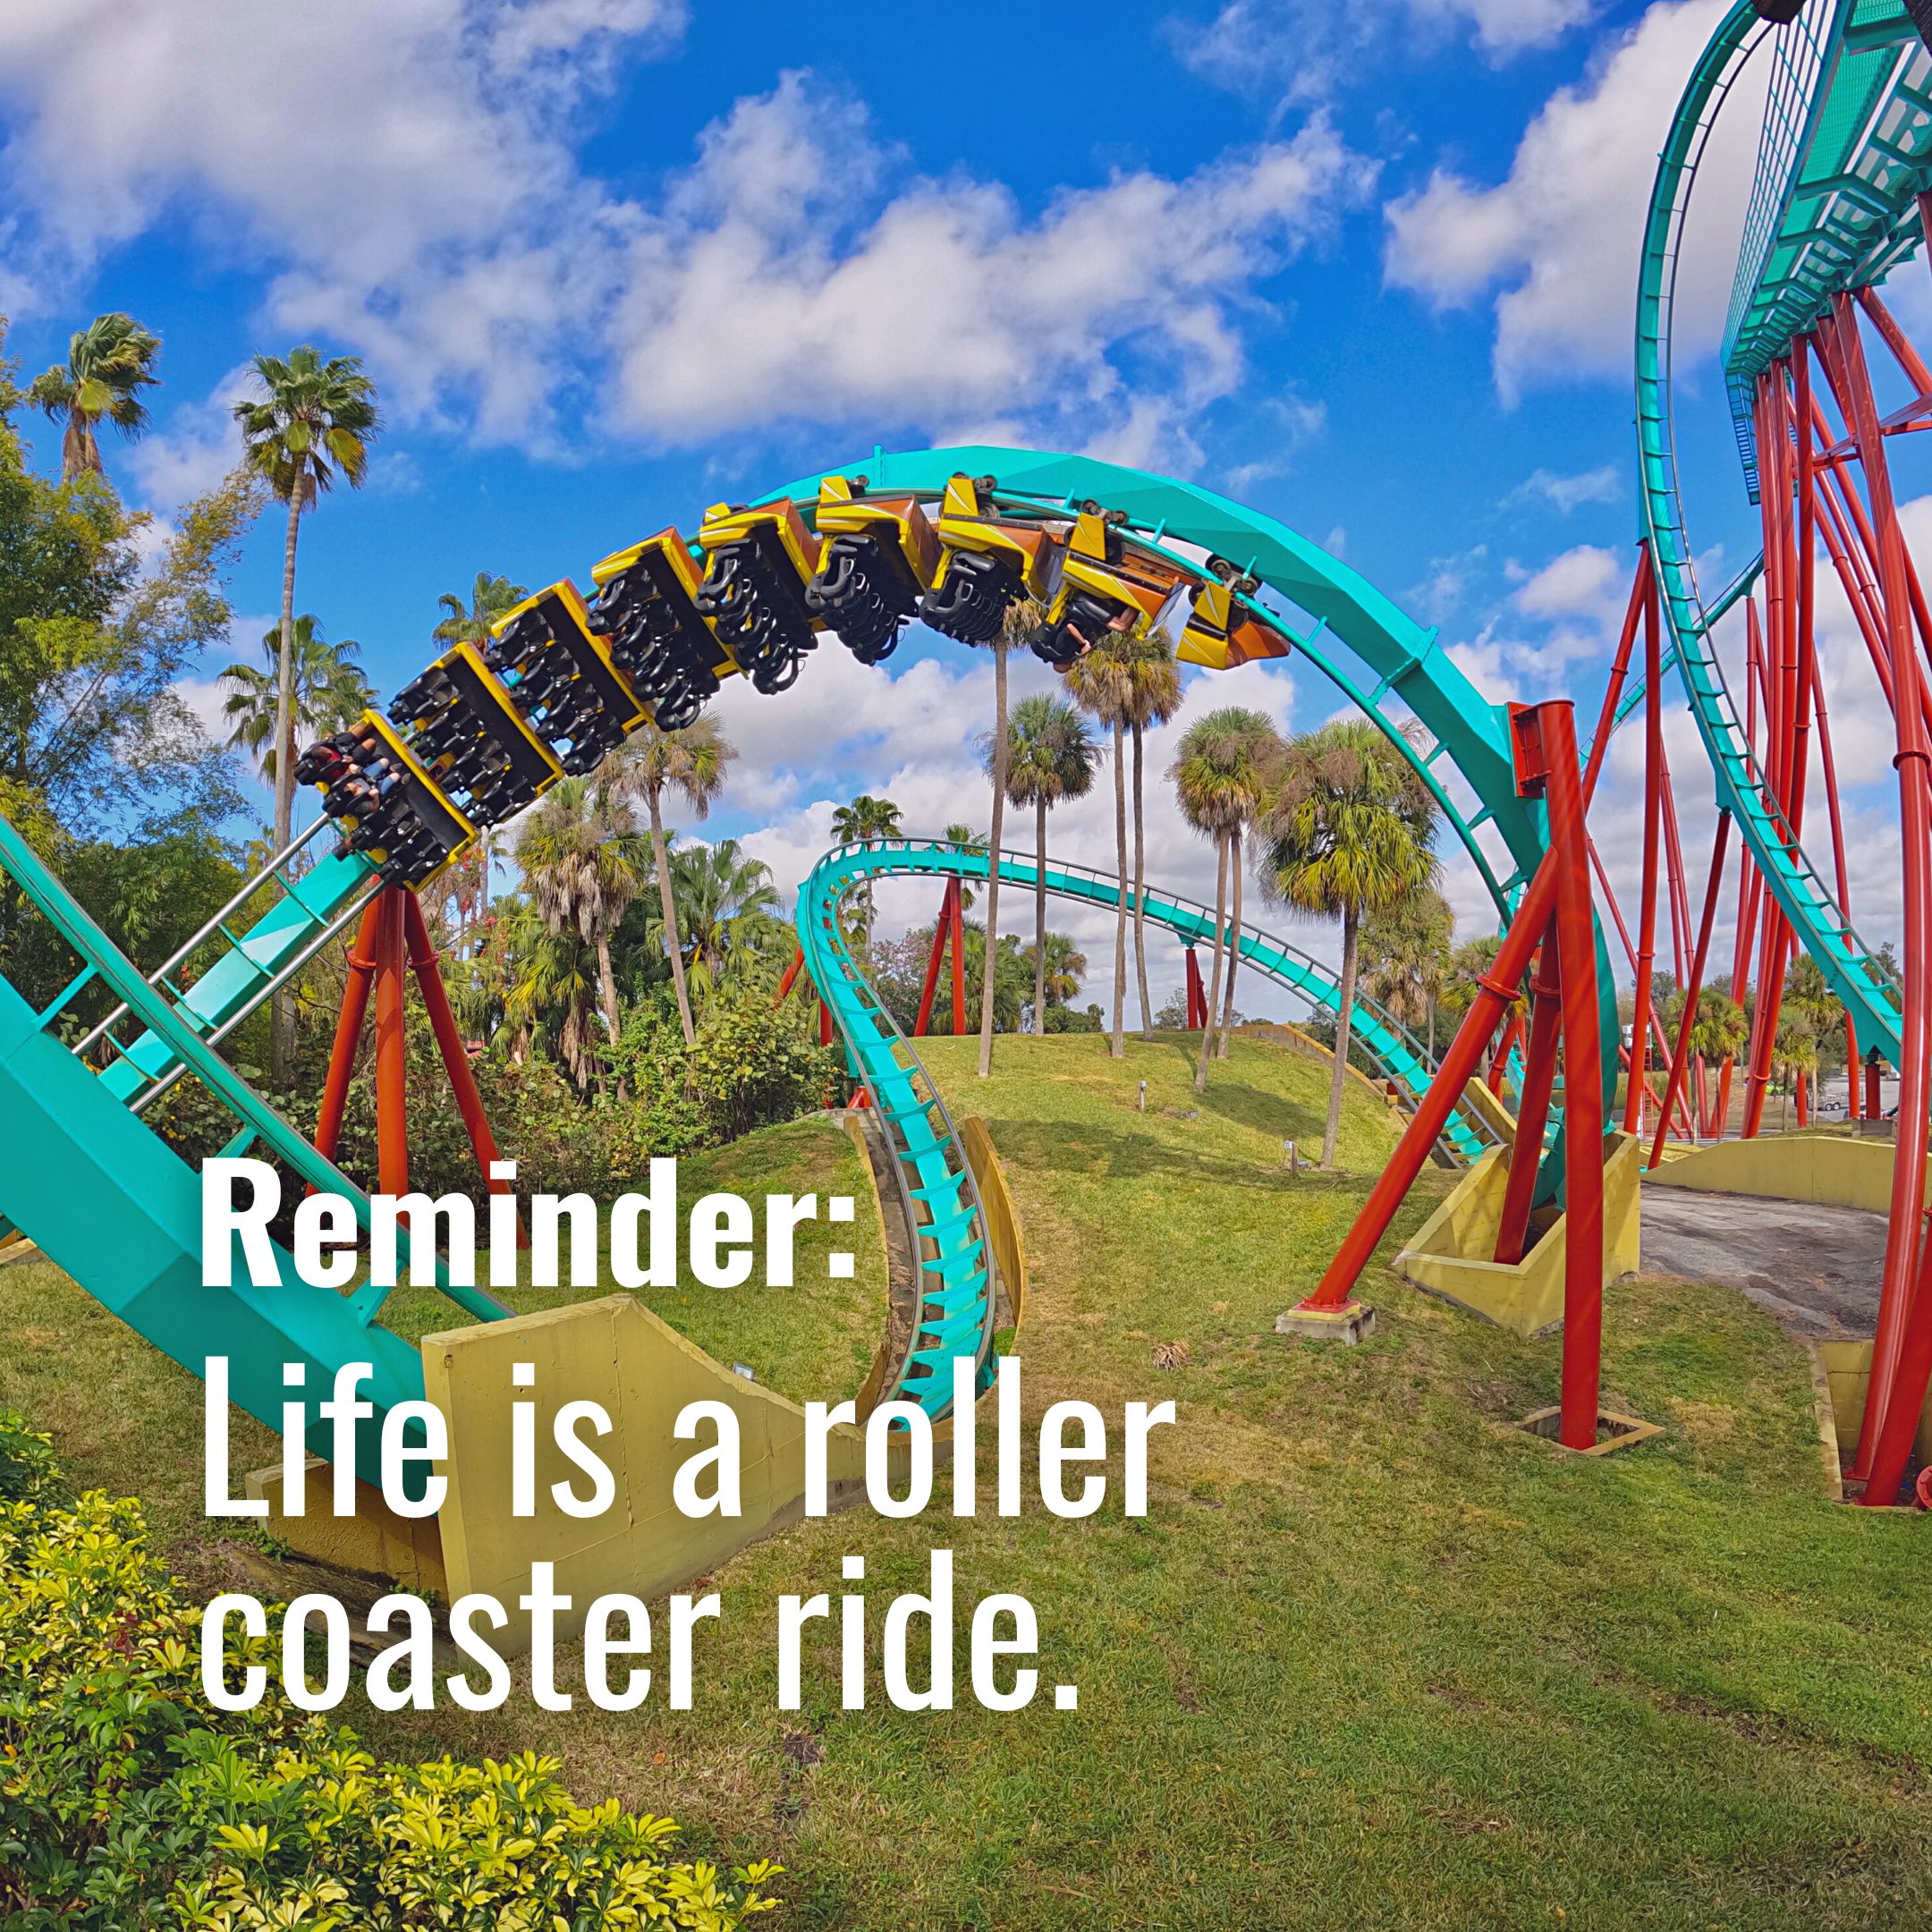 Life is a roller coaster ride.